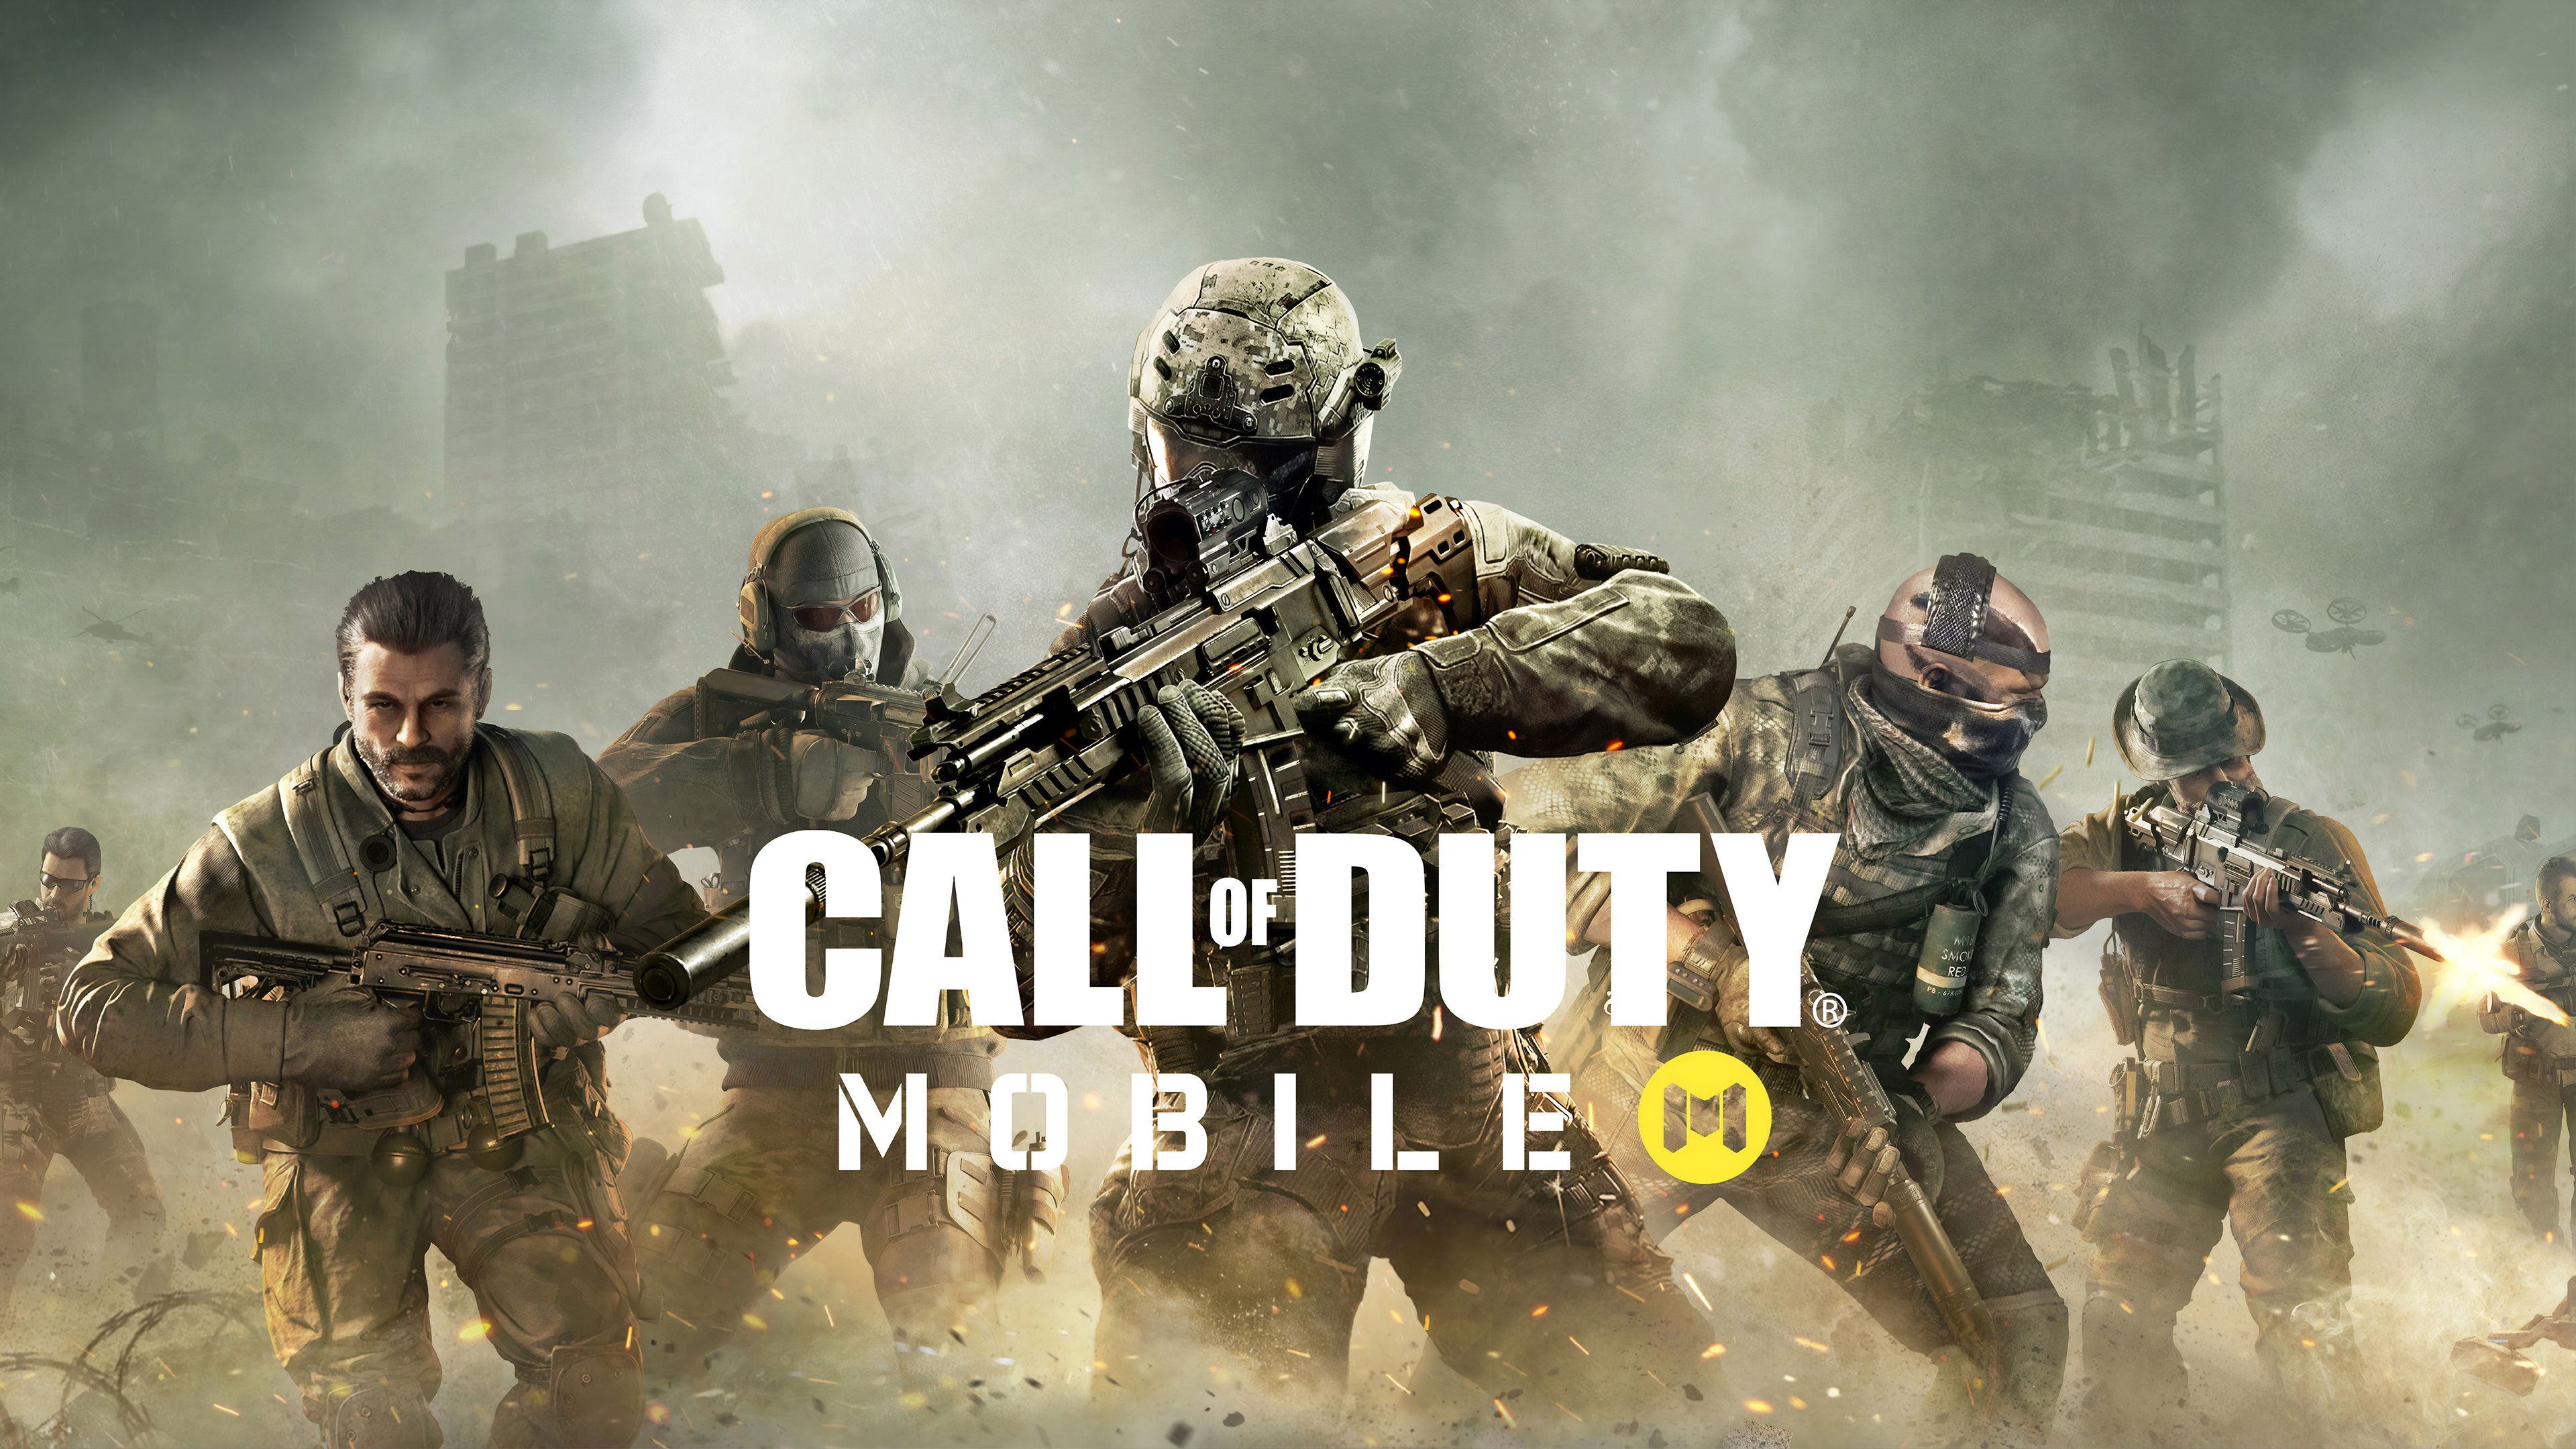 Call Of Duty Modern Warfare Wallpapers - Call Of Duty Mobile Images Hd -  3840x2160 Wallpaper 